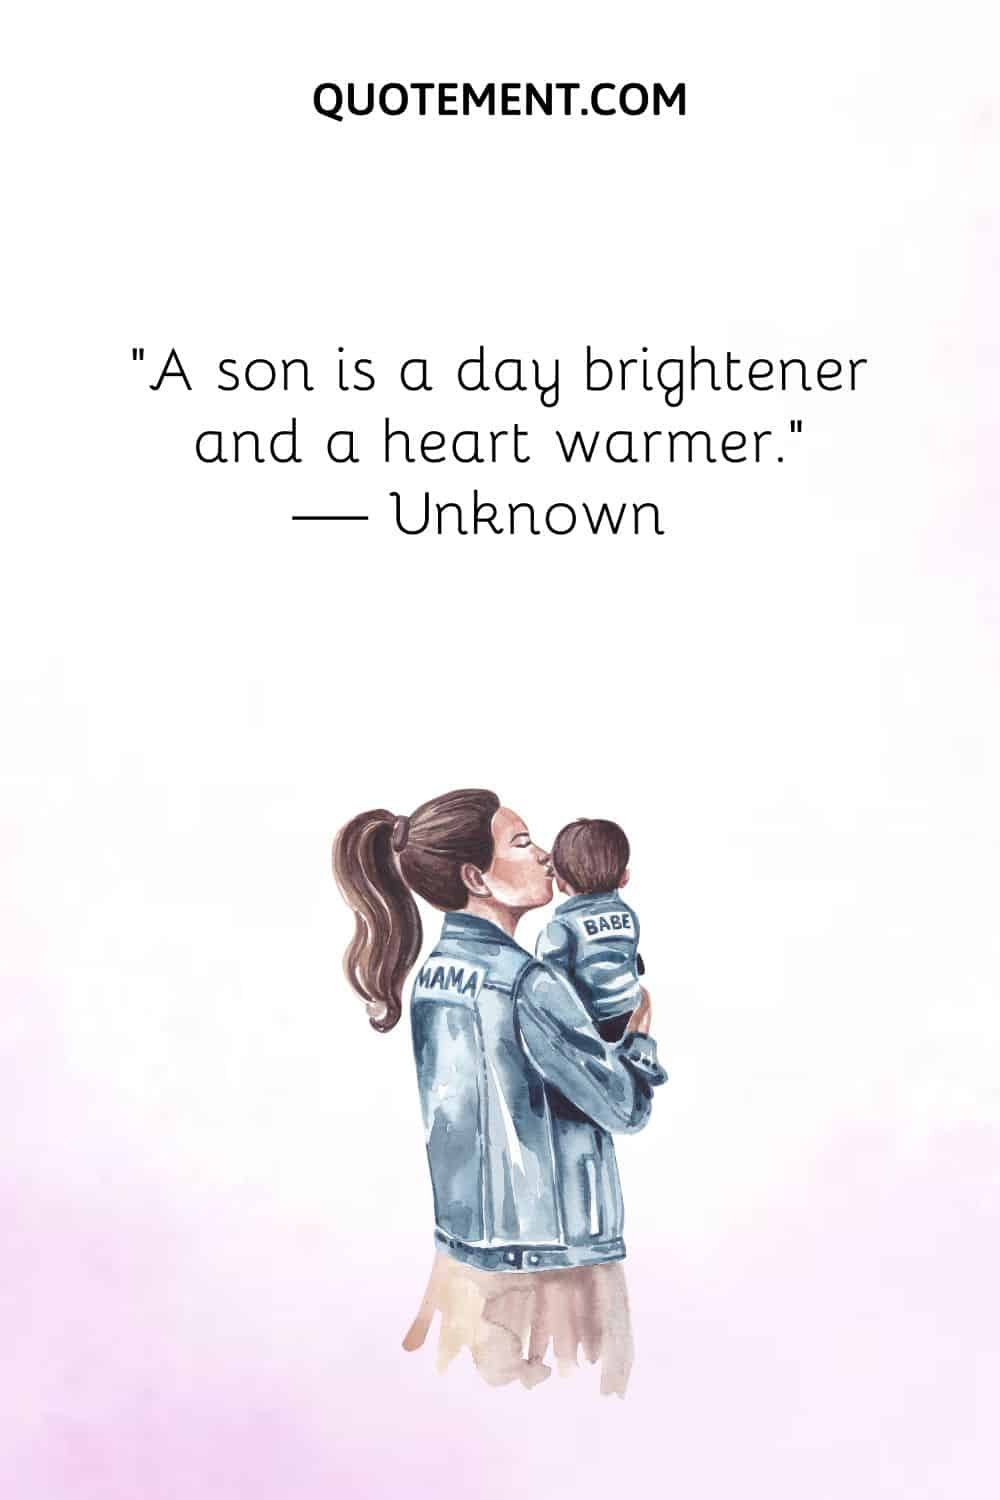 A son is a day brightener and a heart warmer